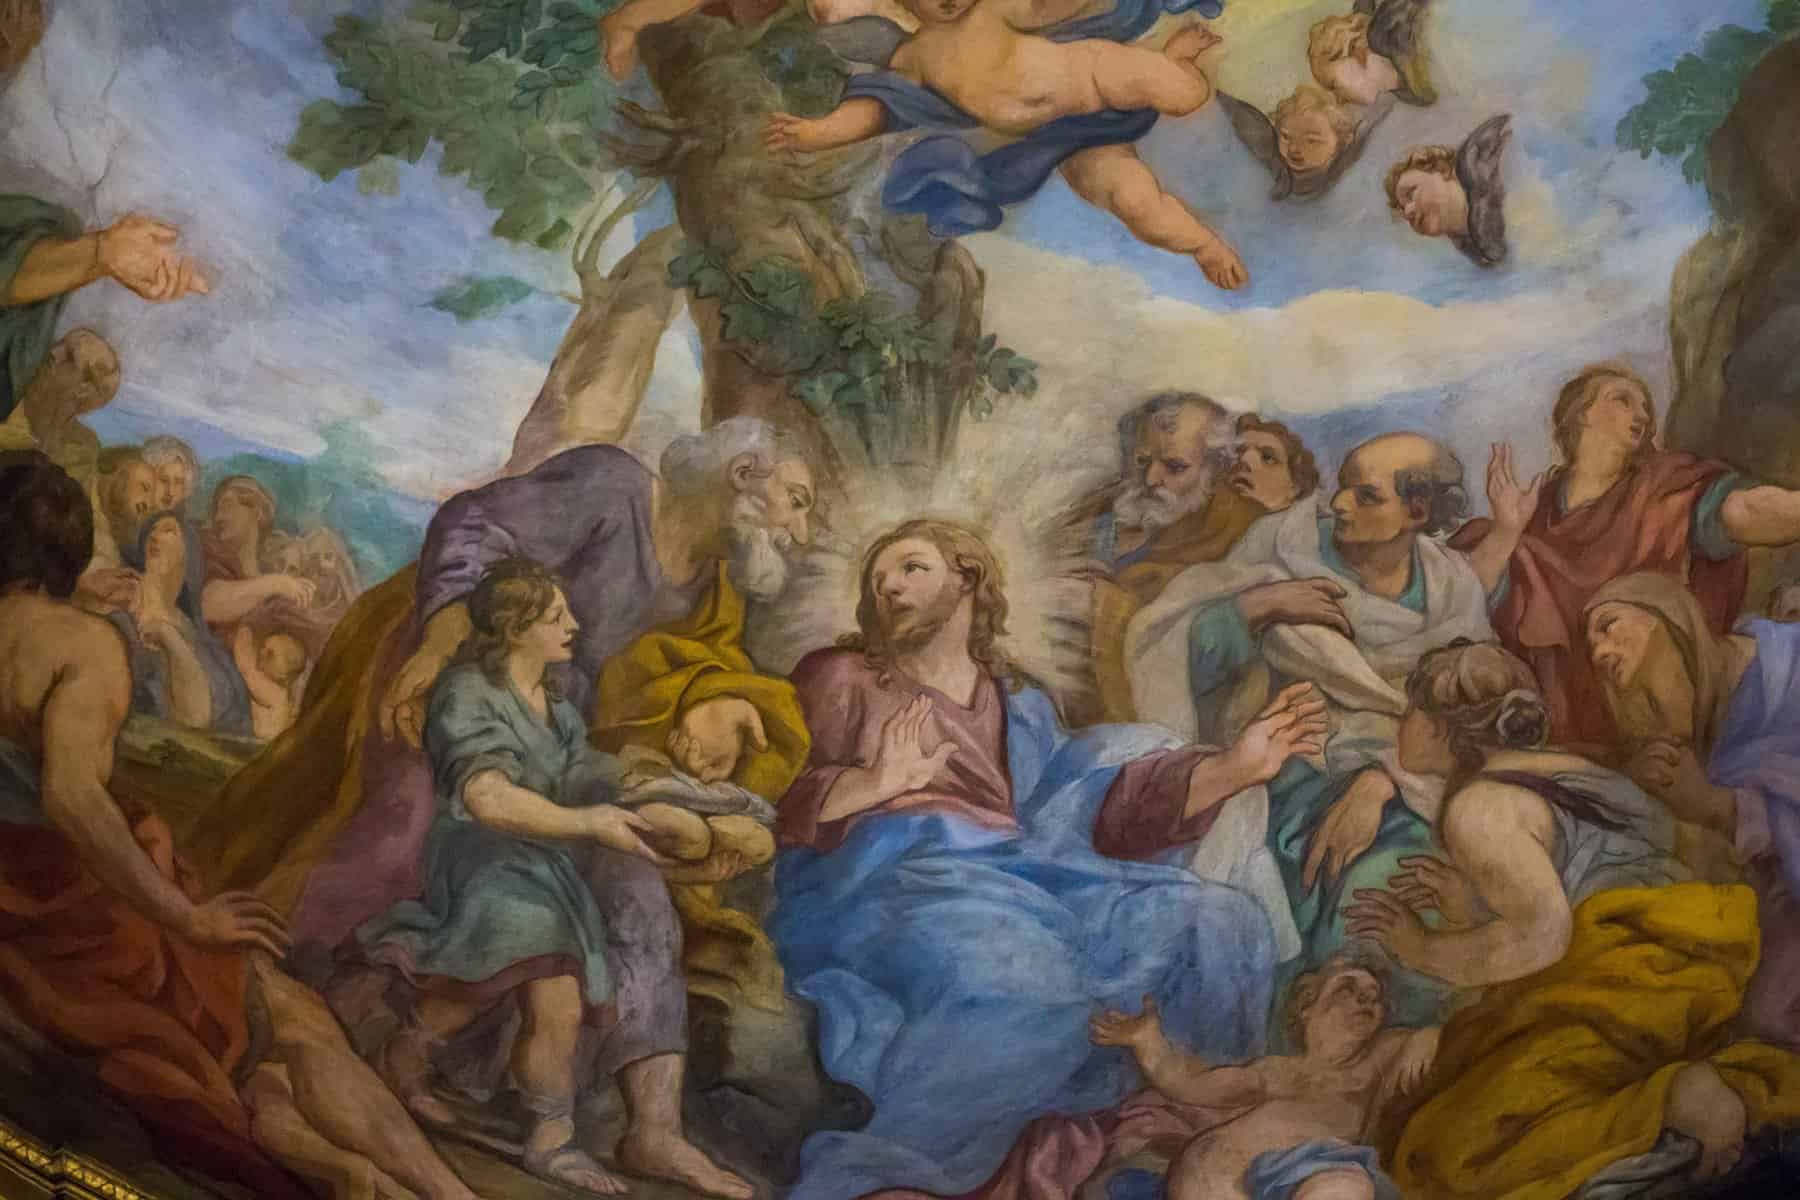 A painting depicts Jesus with angels above him.